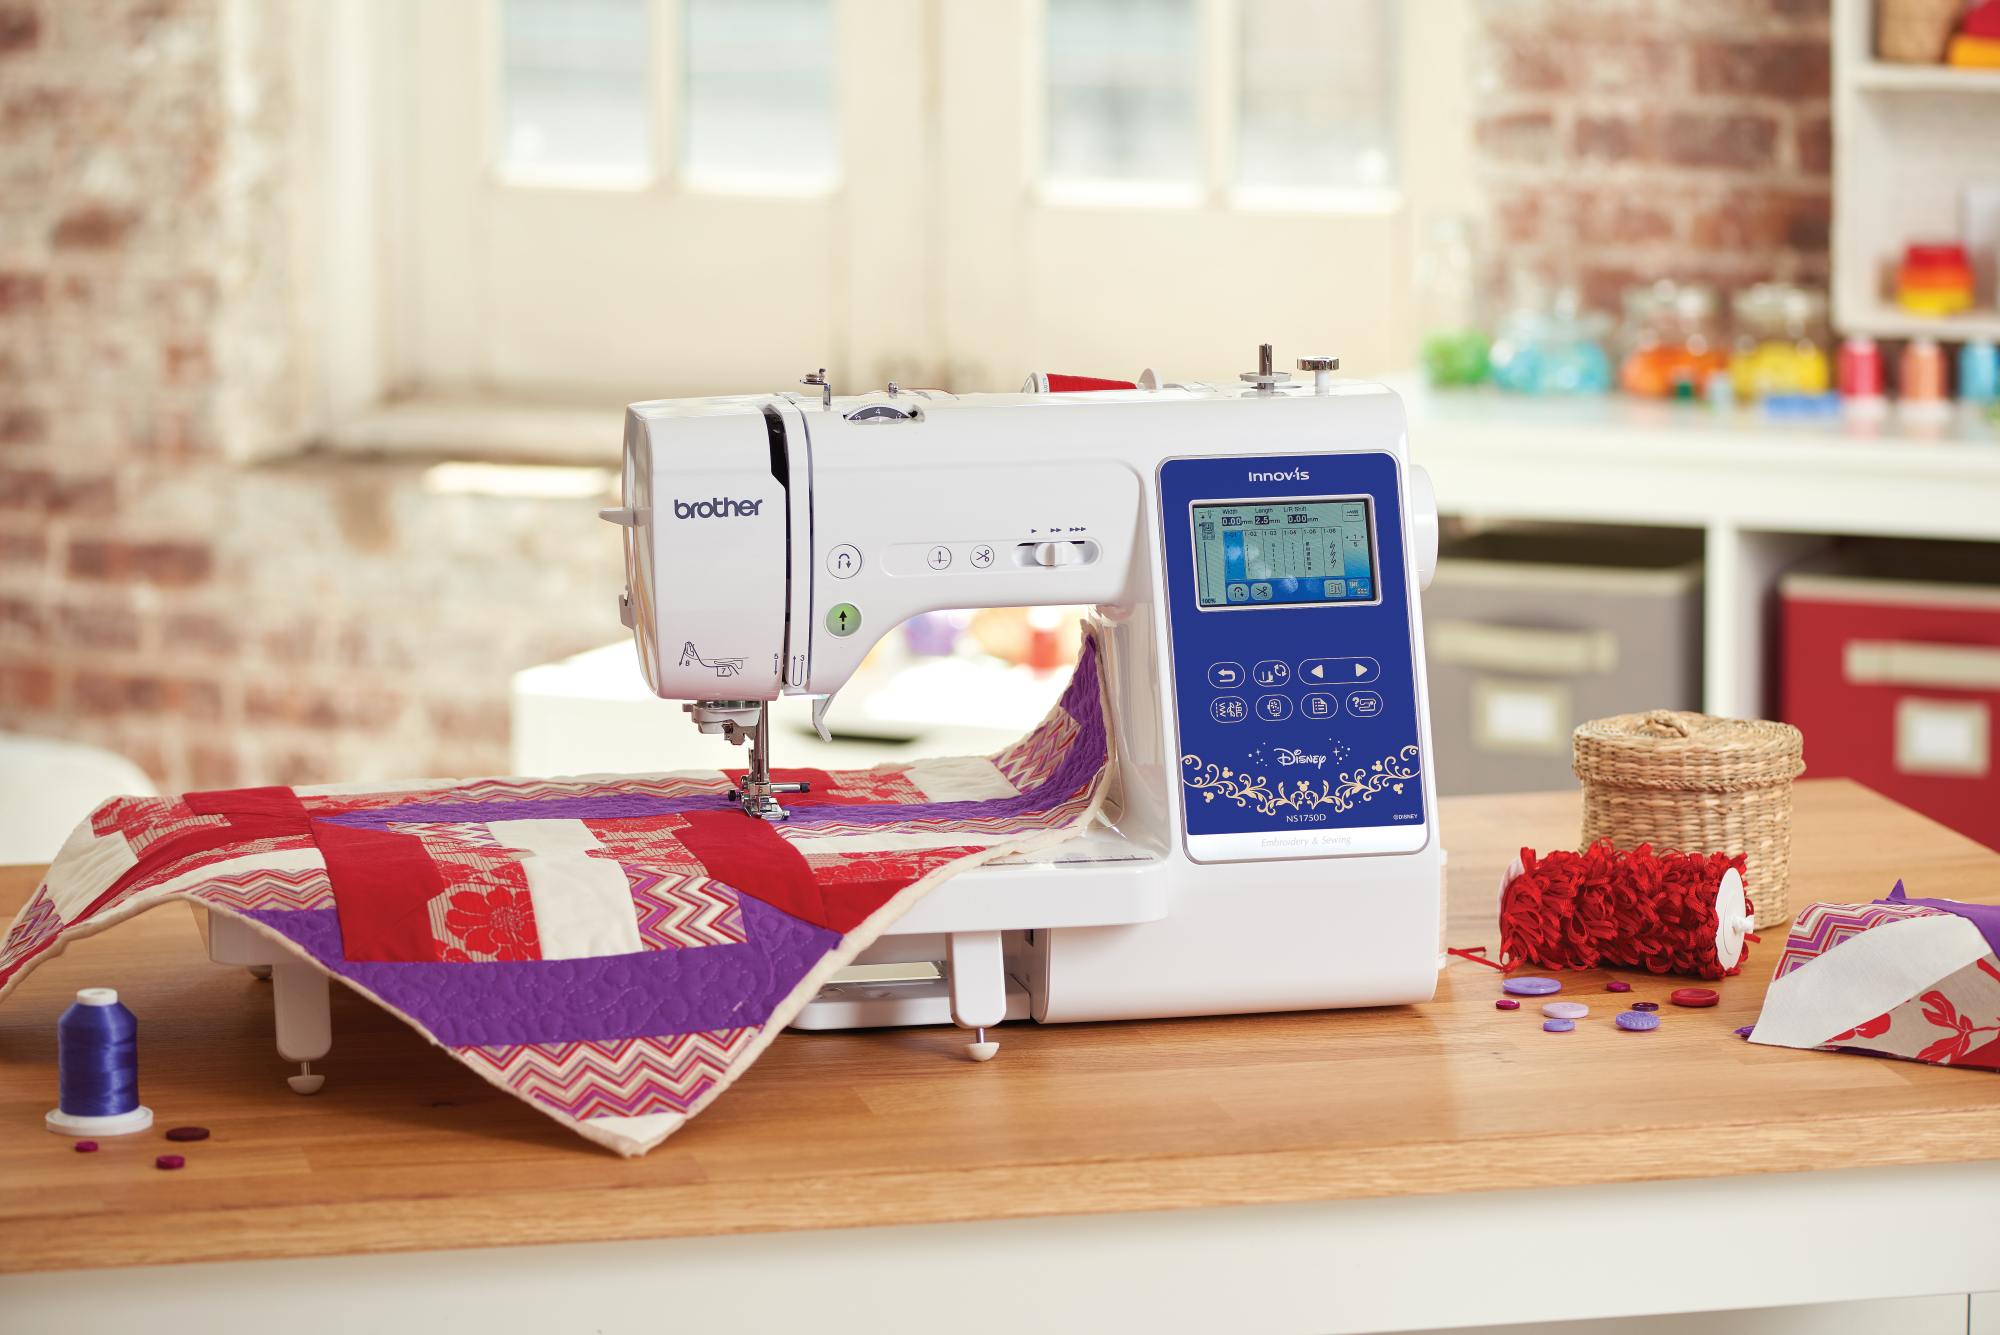 image of the Brother Innov-is NS1750D Sewing and Embroidery Machine 4x4 being used to quilt a quilt on a table with quilting supplies